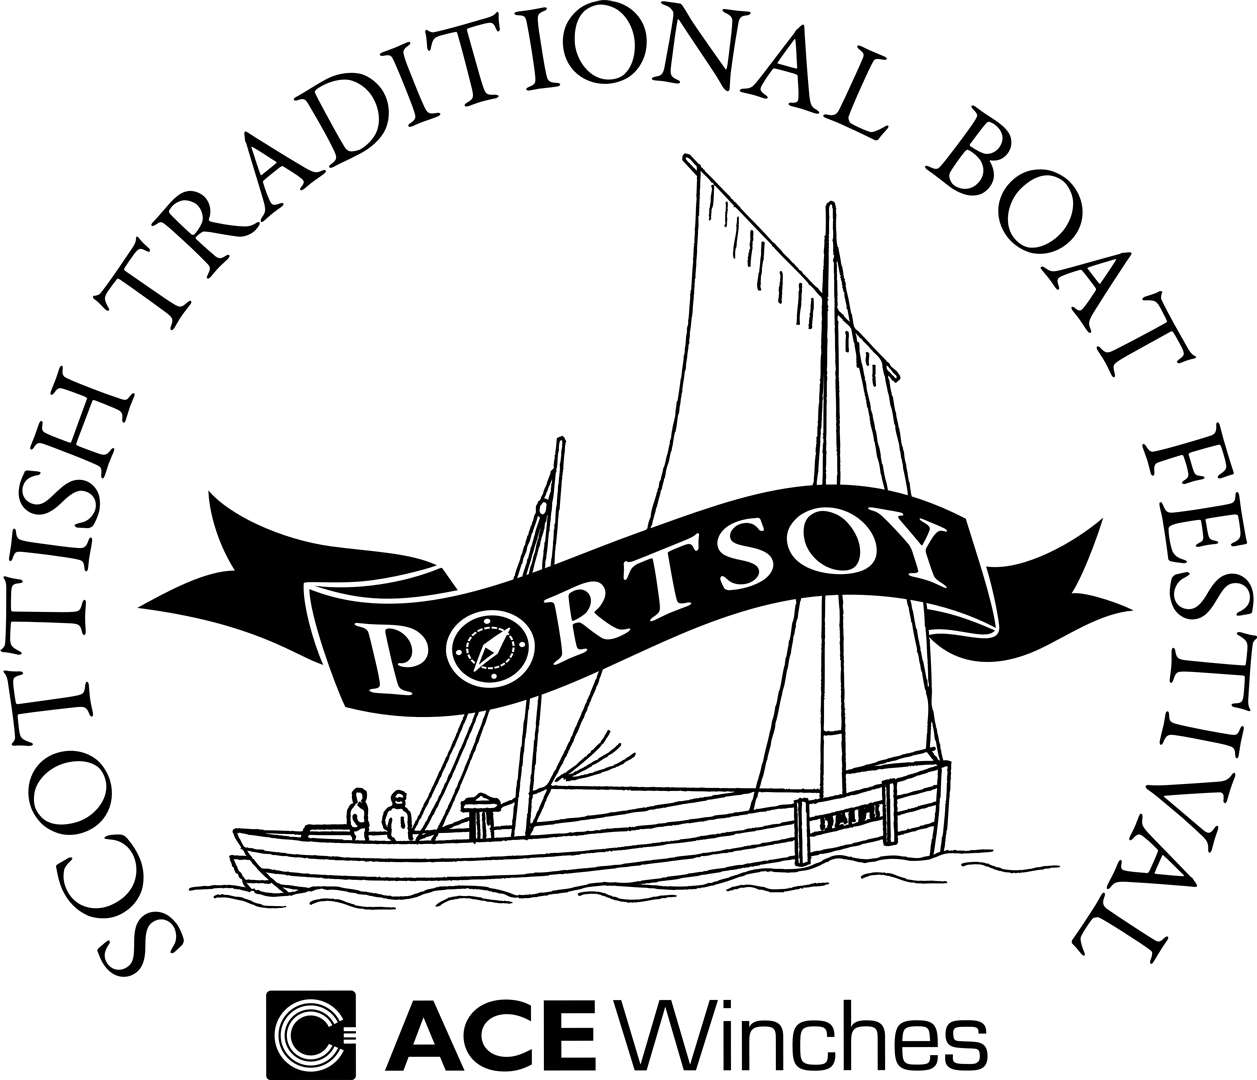 The festival will be sponsored by Ace Winches this year.